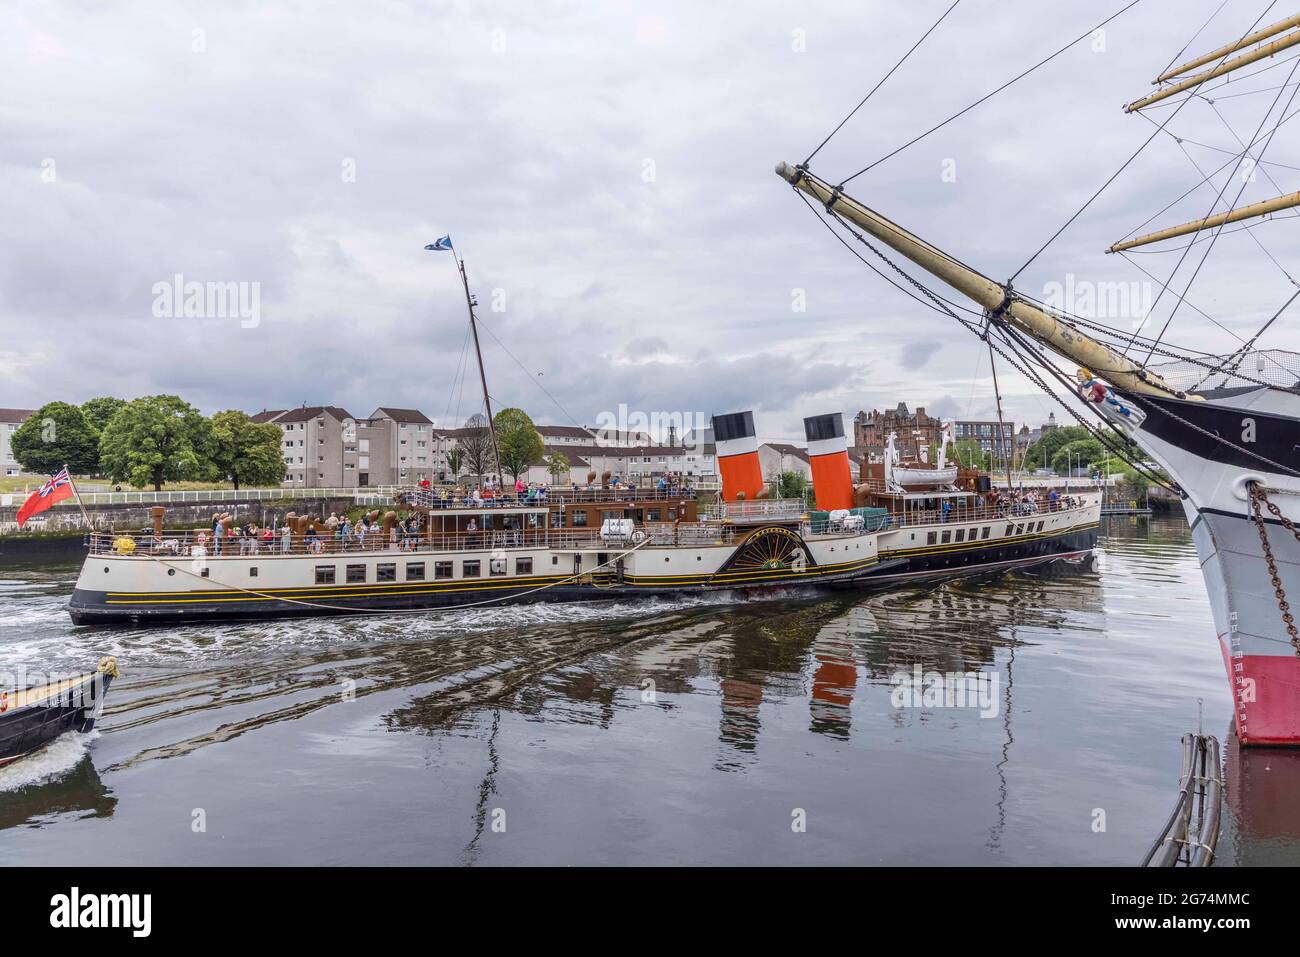 Glasgow, Scotland, UK. 11th July 2021. Pictured: The steamship Waverley passes the Tallship, Glenlee as it leaves Glasgow at the start of its daily trip around the Clyde estuary. Credit: Rich Dyson/Alamy Live News Stock Photo